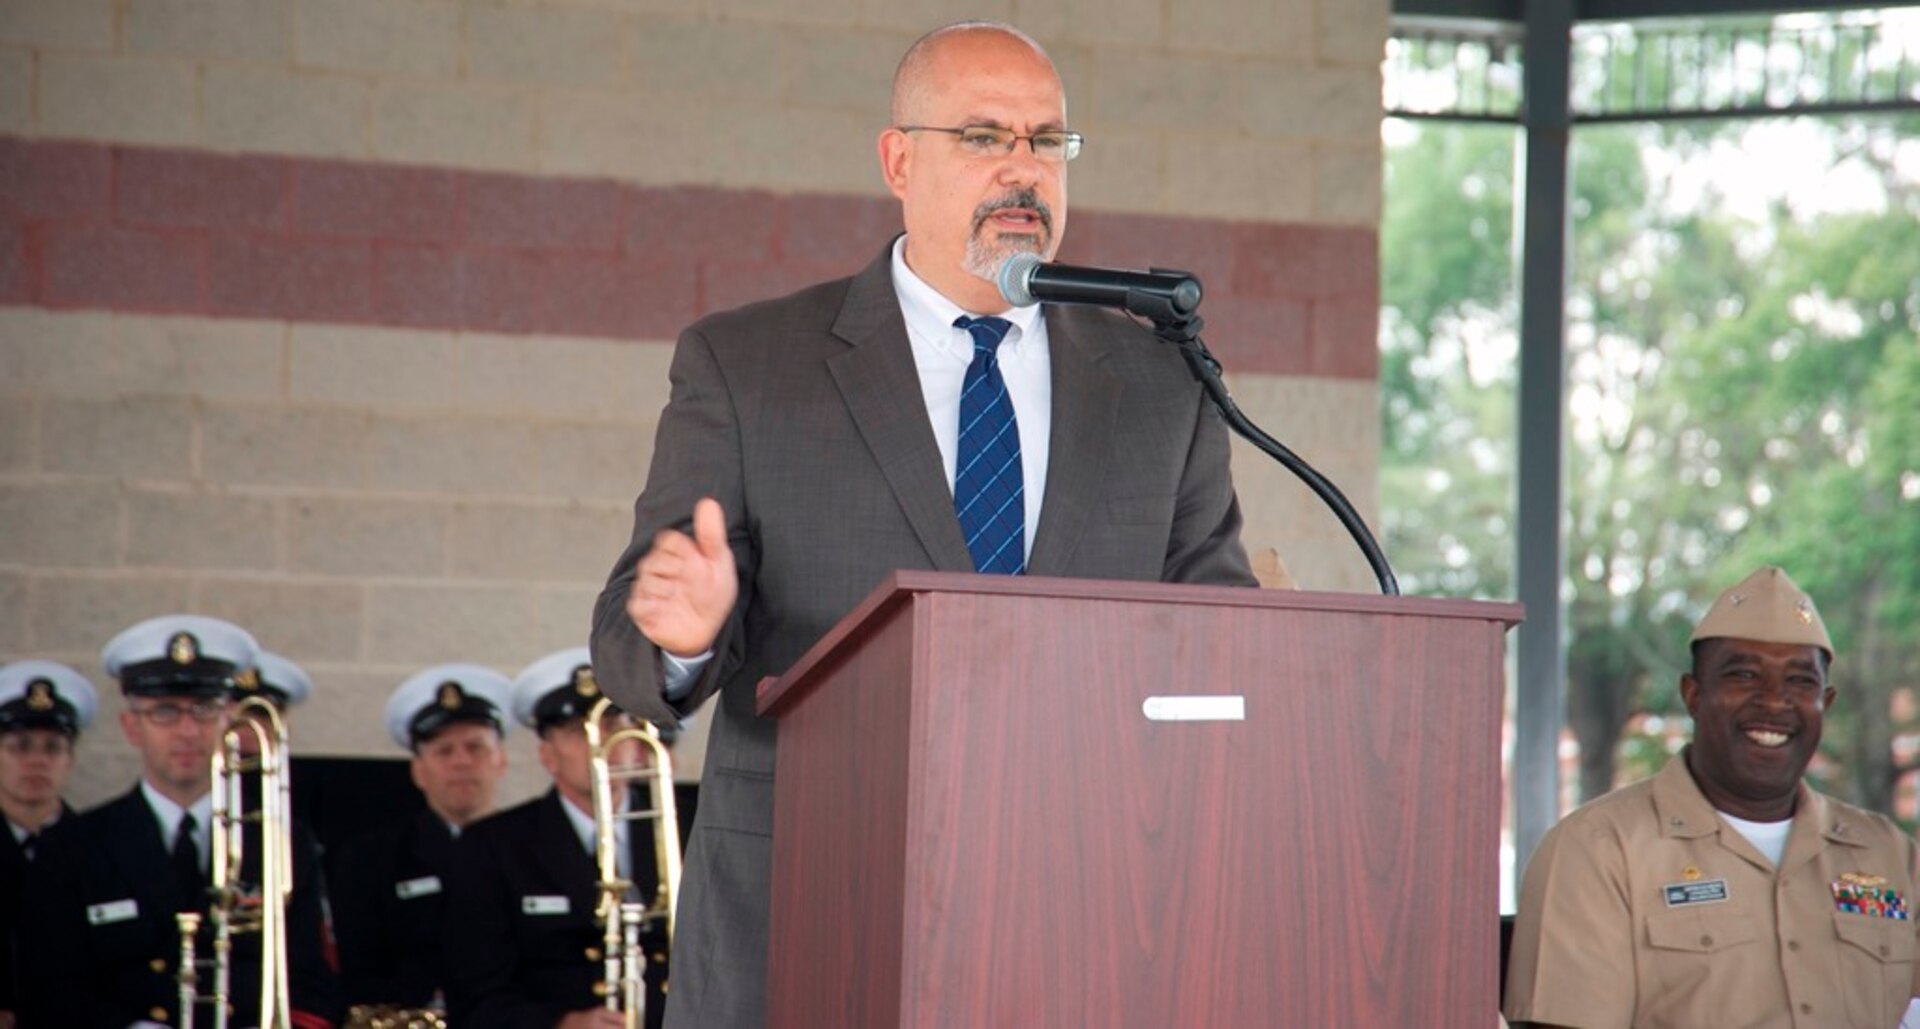 IMAGE: DAHLGREN, Va. (Oct. 16, 2017) – Naval Surface Warfare Center Dahlgren Division Technical Director John Fiore reviews the century of innovation at Dahlgren before the military and civilian audience gathered to celebrate the Navy base’s centennial. “Today we kick off the Dahlgren Centennial countdown,” said Fiore.  “It has the potential to fill us with wonderment. What will be the groundbreaking new innovations of the Navy's future and who will be there to make that happen? I look forward to the events that are scheduled throughout this year in celebrating our centennial but even more important than what we’ve done in the past is where we’re going to go in the future and the contributions we will make to the Navy moving forward.”